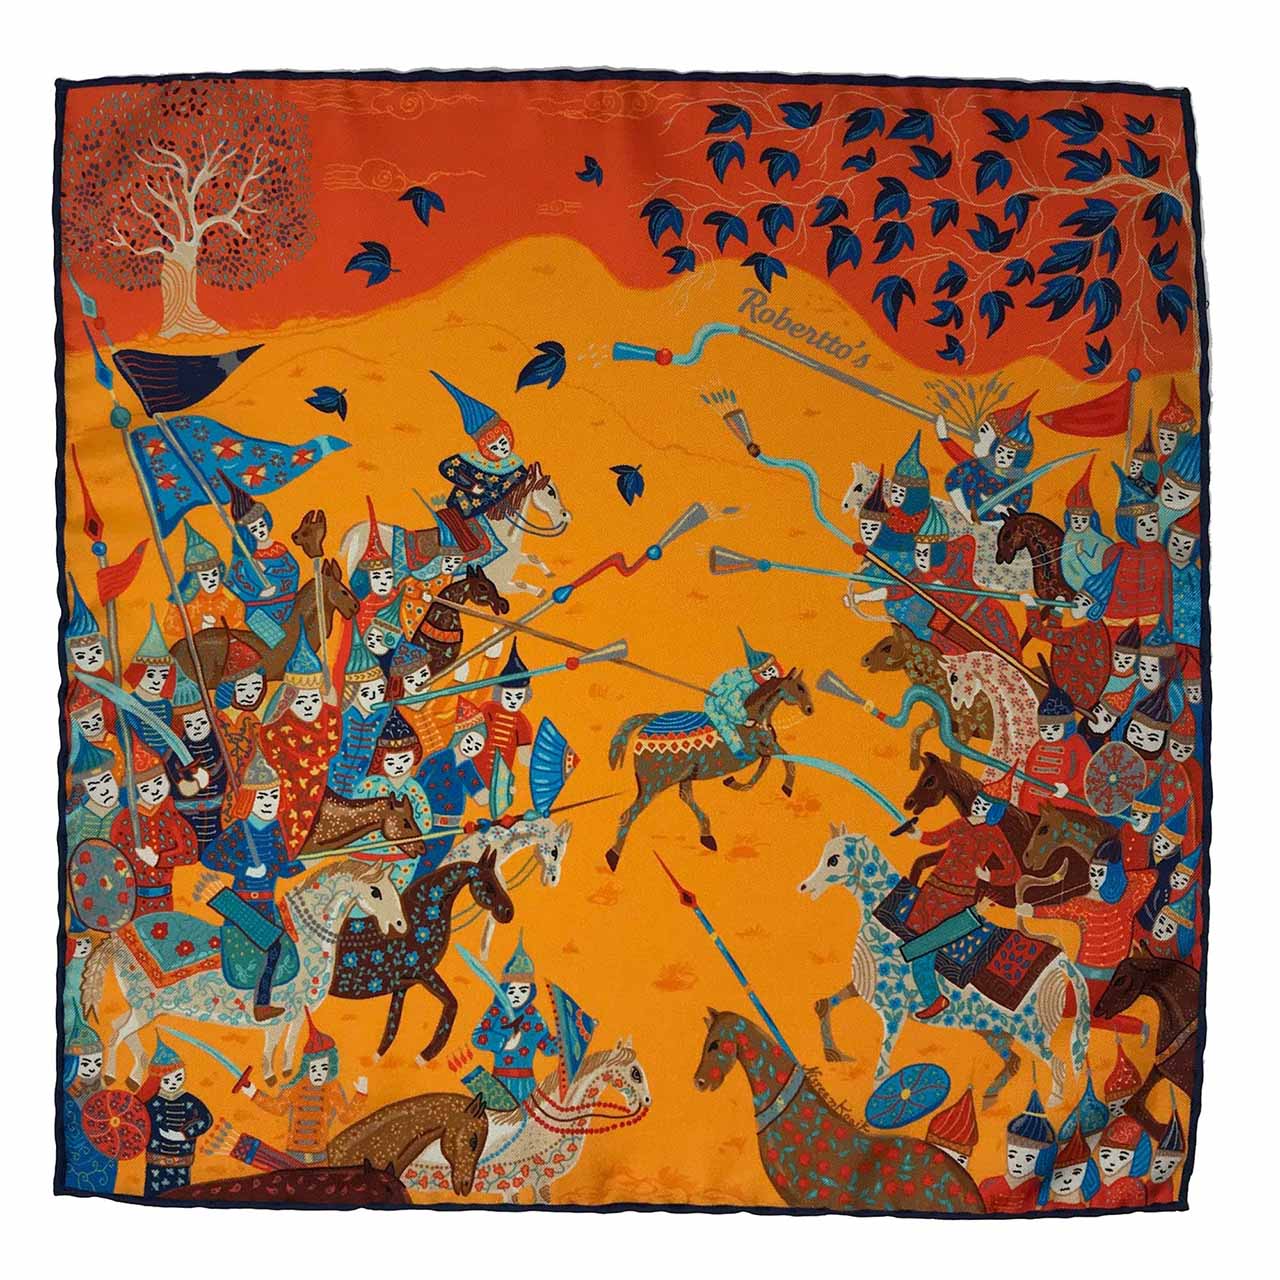 Battle of the Mughals Mustard Yellow Pocket Square